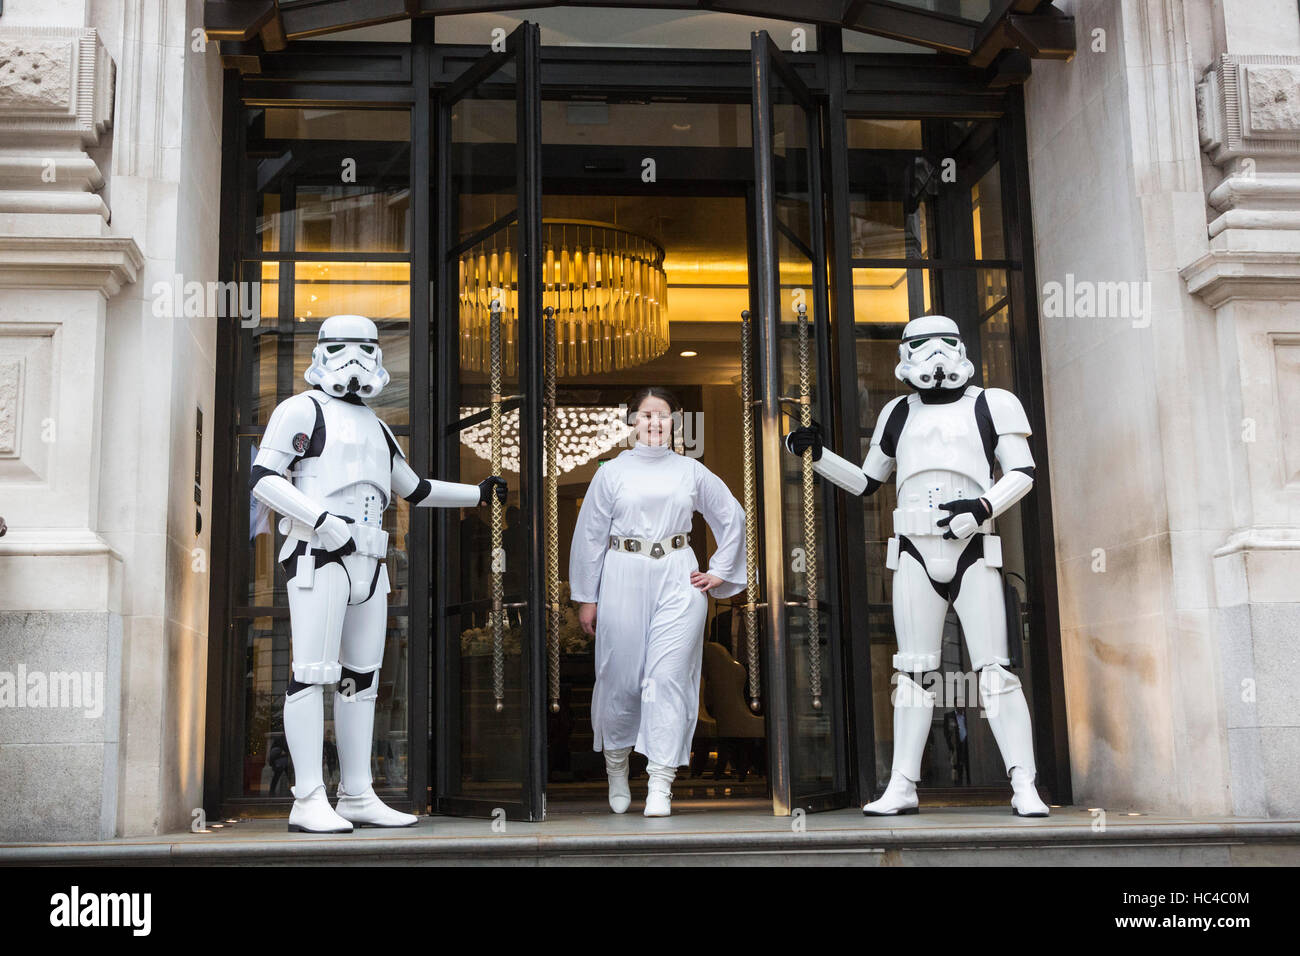 London, UK. 8 December 2016. Stormtroopers and Princess Leia at the launch event. Launch event of the 2017 London's New Year's Day Parade at the Corinthia Hotel. The parade is themed 'Lights, Camera, Actions and will feature characters from the movies. Credit:  Nick Savage/Alamy Live News Stock Photo